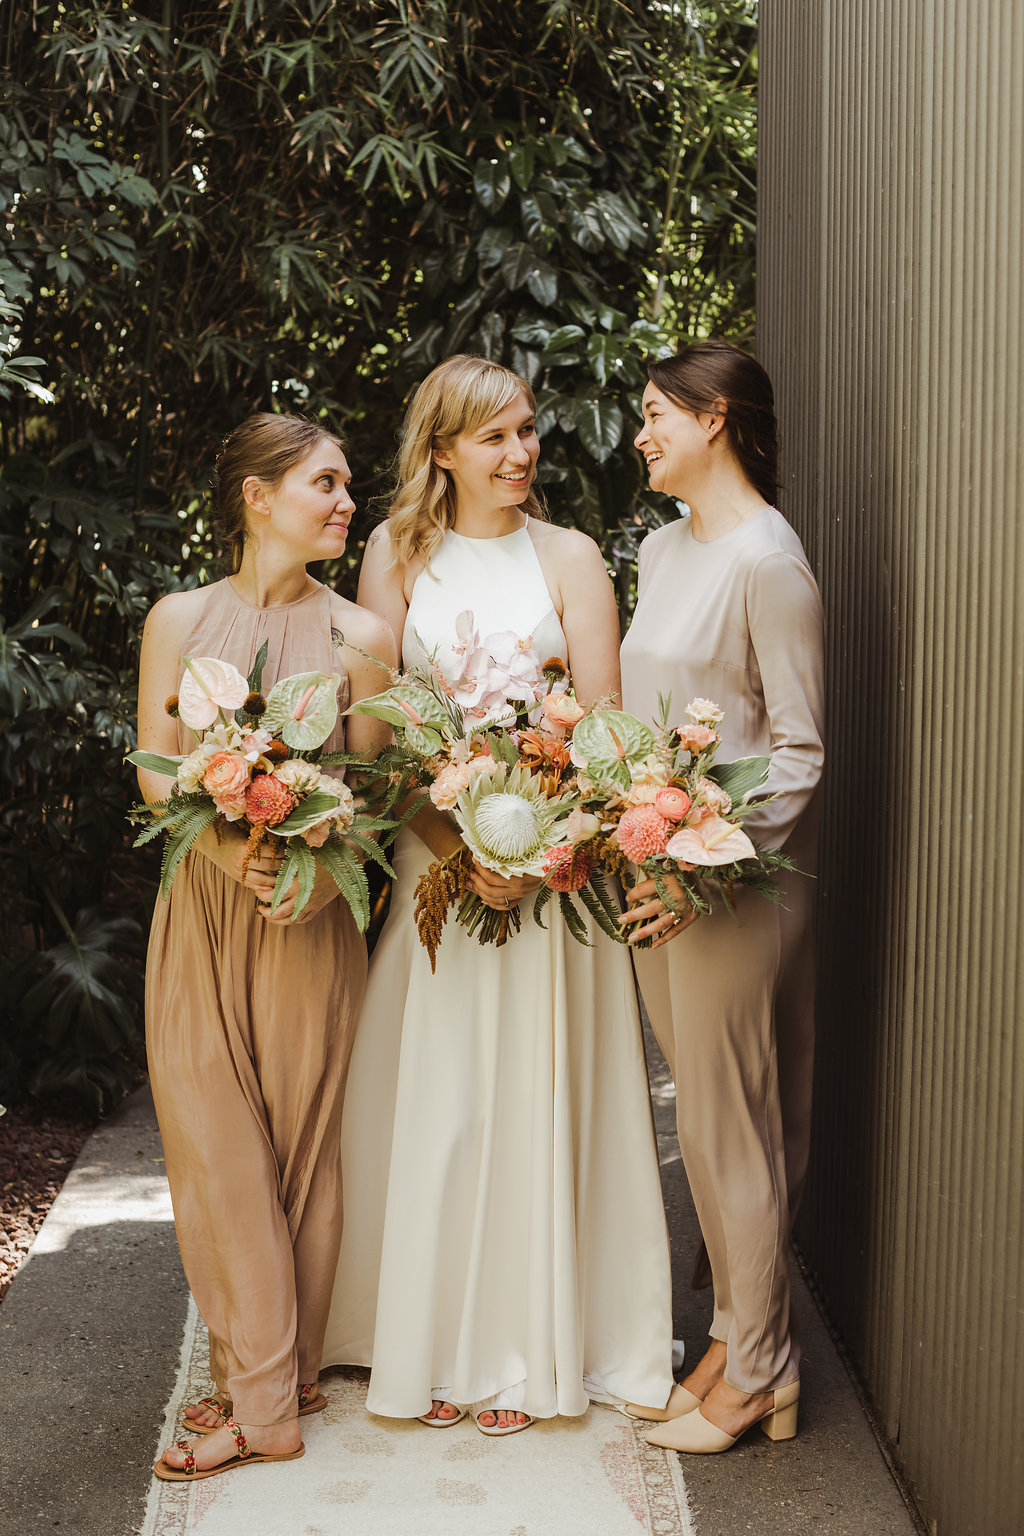 Modern tropical bride and bridesmaid bouquets